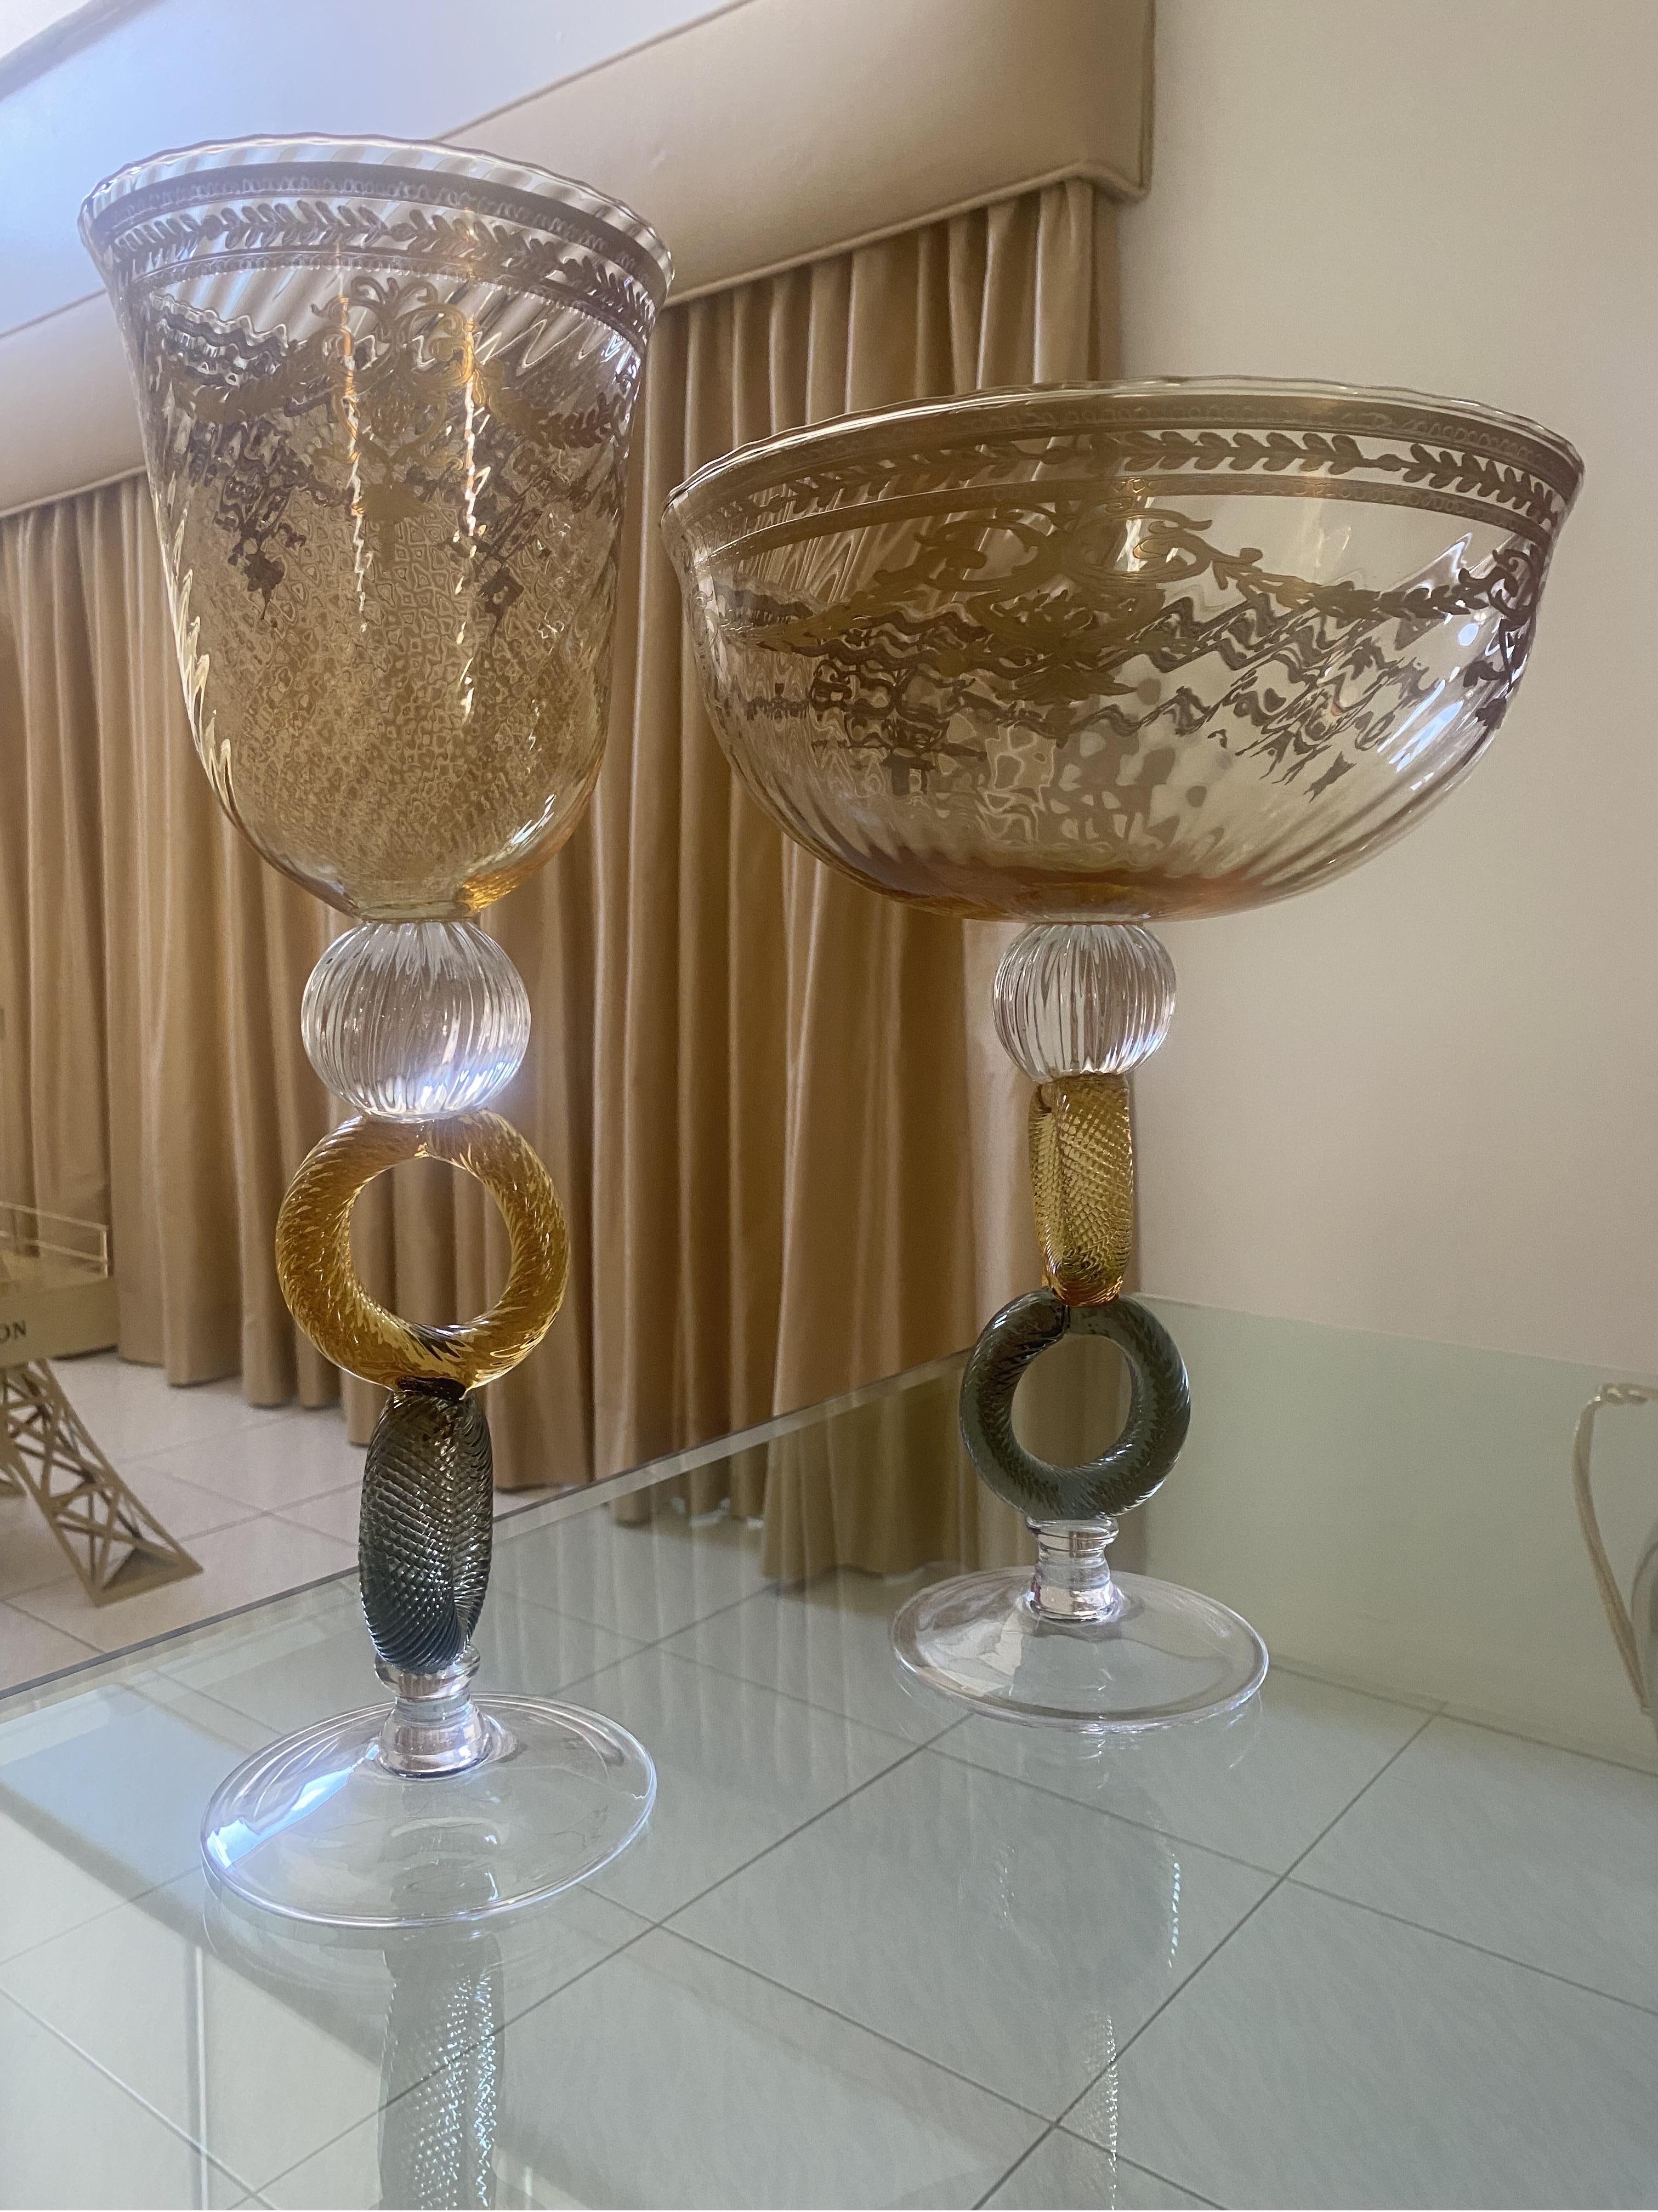 Pair of Italian Mid-Century Venetian Glass Art with Gold Trim For Sale 2